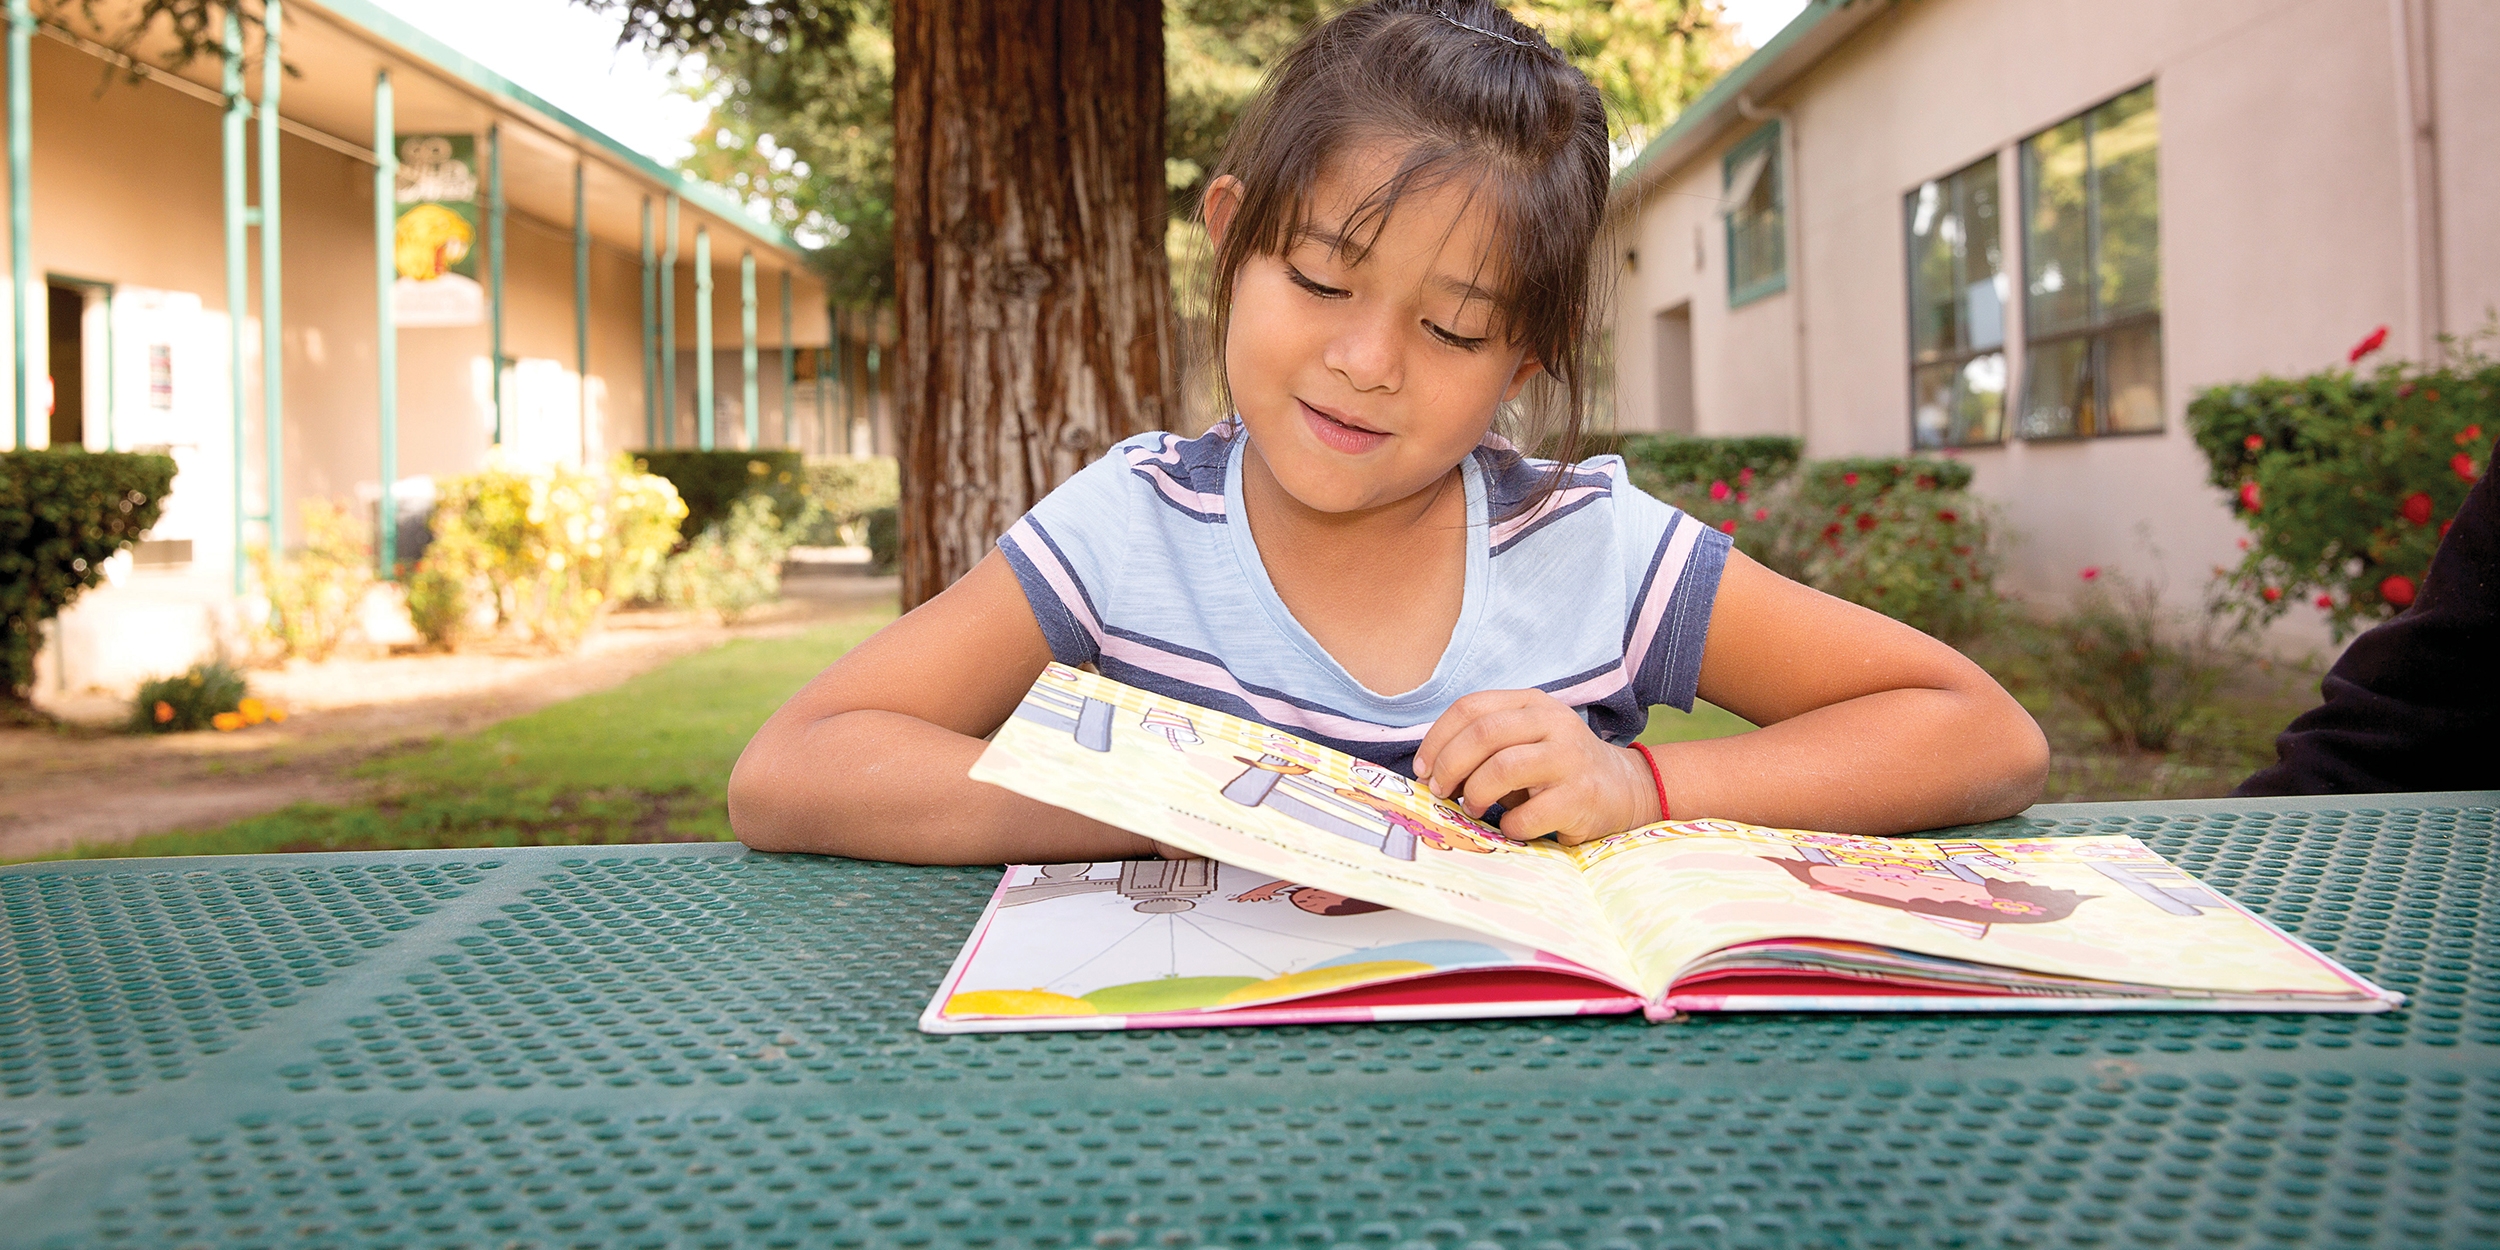 7-year-old Stephanie flips through the pages of a book during one of Save the Children’s after-school programs in Central Valley, California. The program gives students opportunities to strengthen their literacy skills, get support with homework and participate in physical activities that combine fitness and fun. Photo credit: Tamar Levine/Save the Children, November 2017.